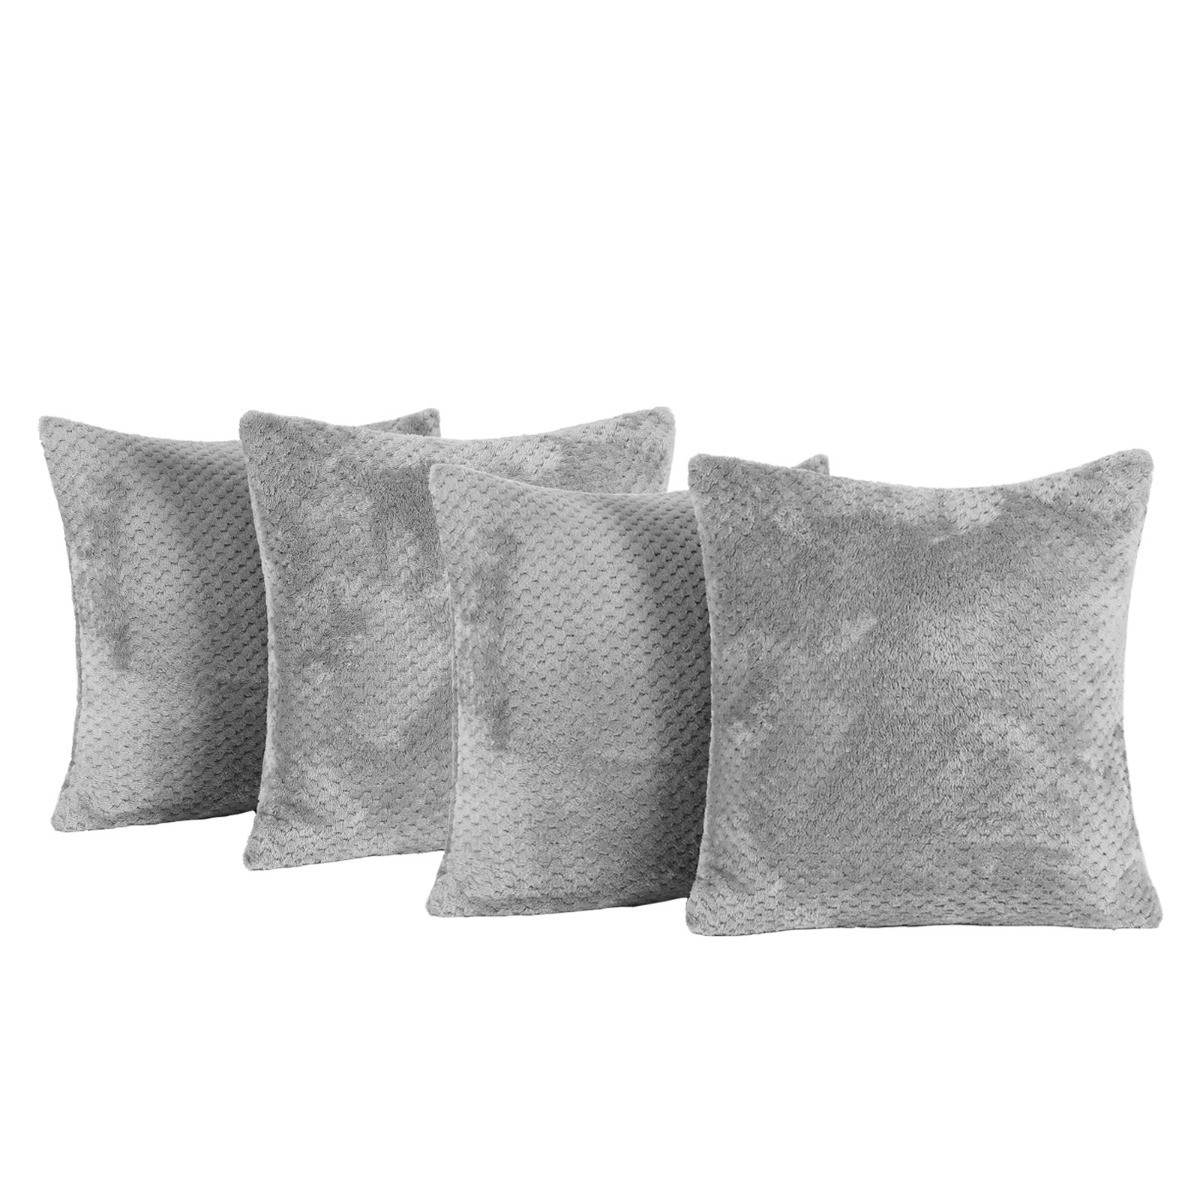 Brentfords 4 Pack Waffle Fleece Cushion Covers, Charcoal - 45 x 45cm>